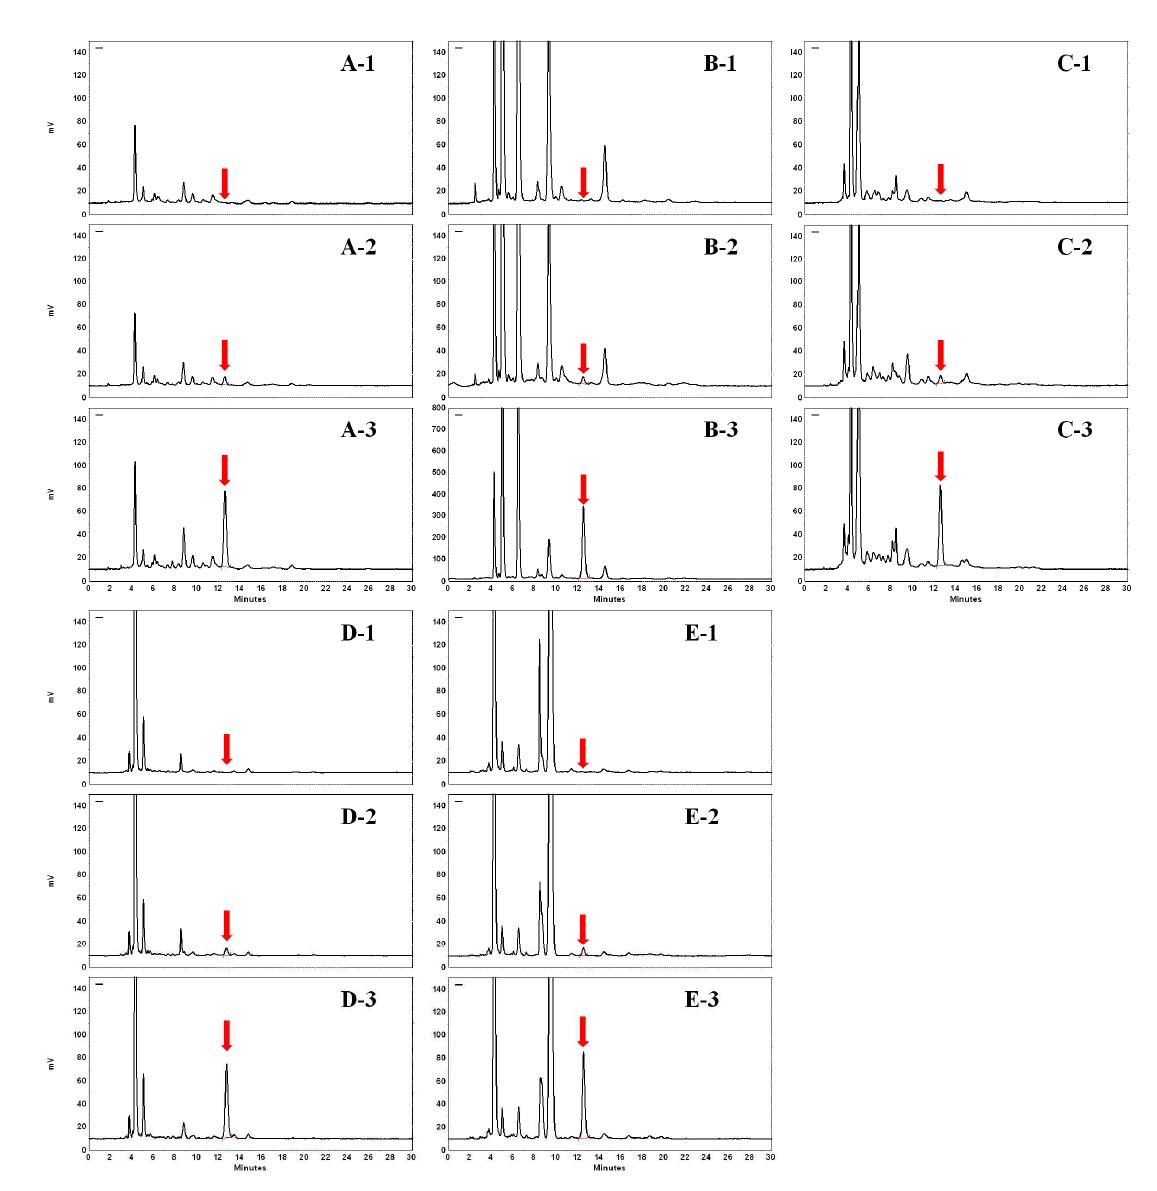 Chromatograms of fortified ethychlozate in agricultural commodities